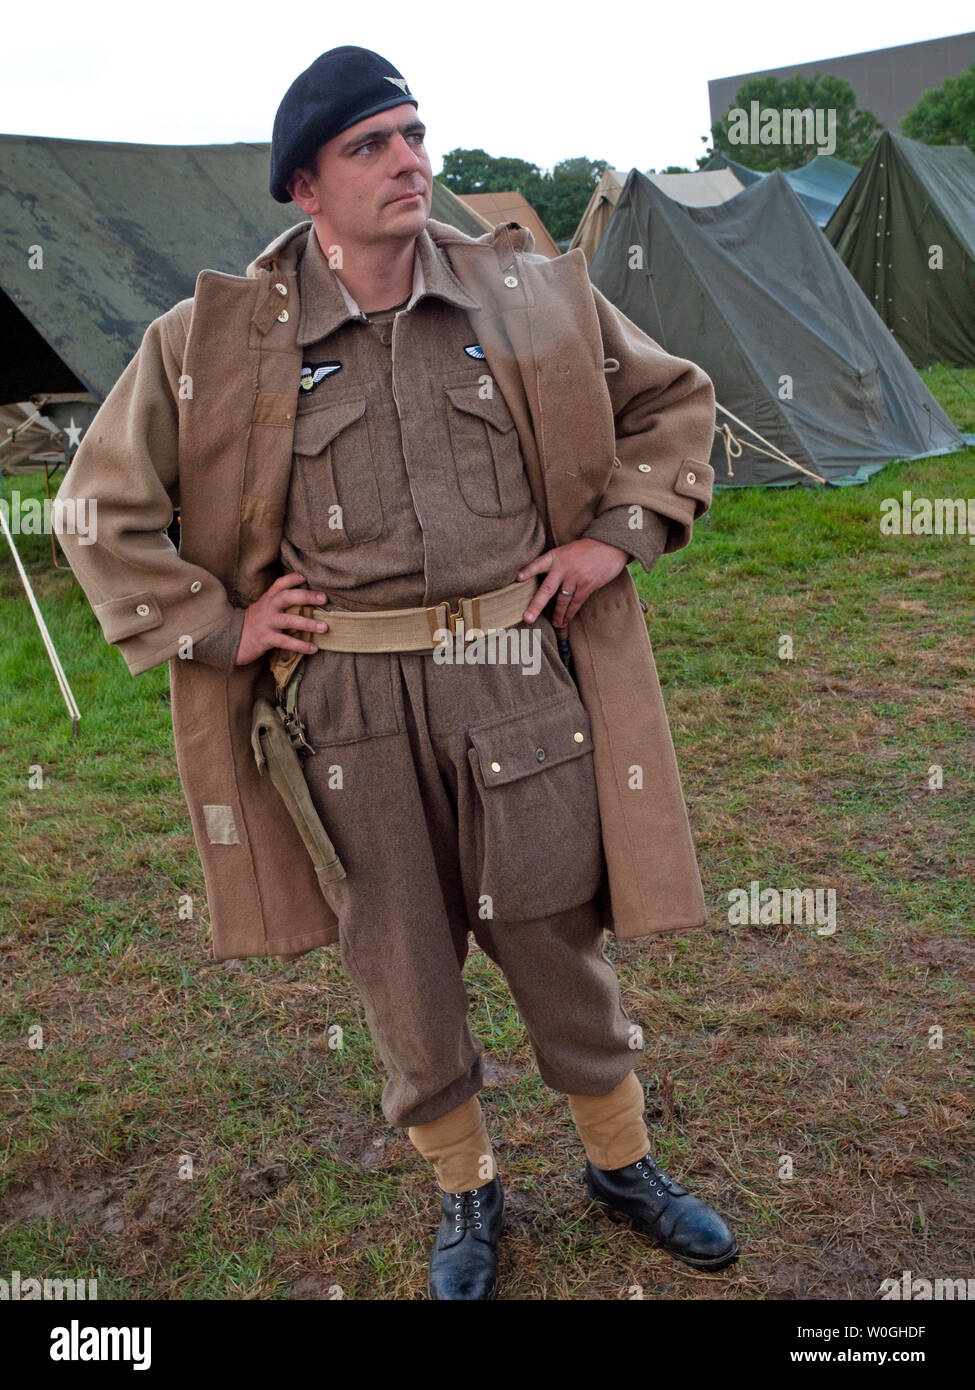 A World War 2 historical reenactment enthusiast in Normandy Stock Photo